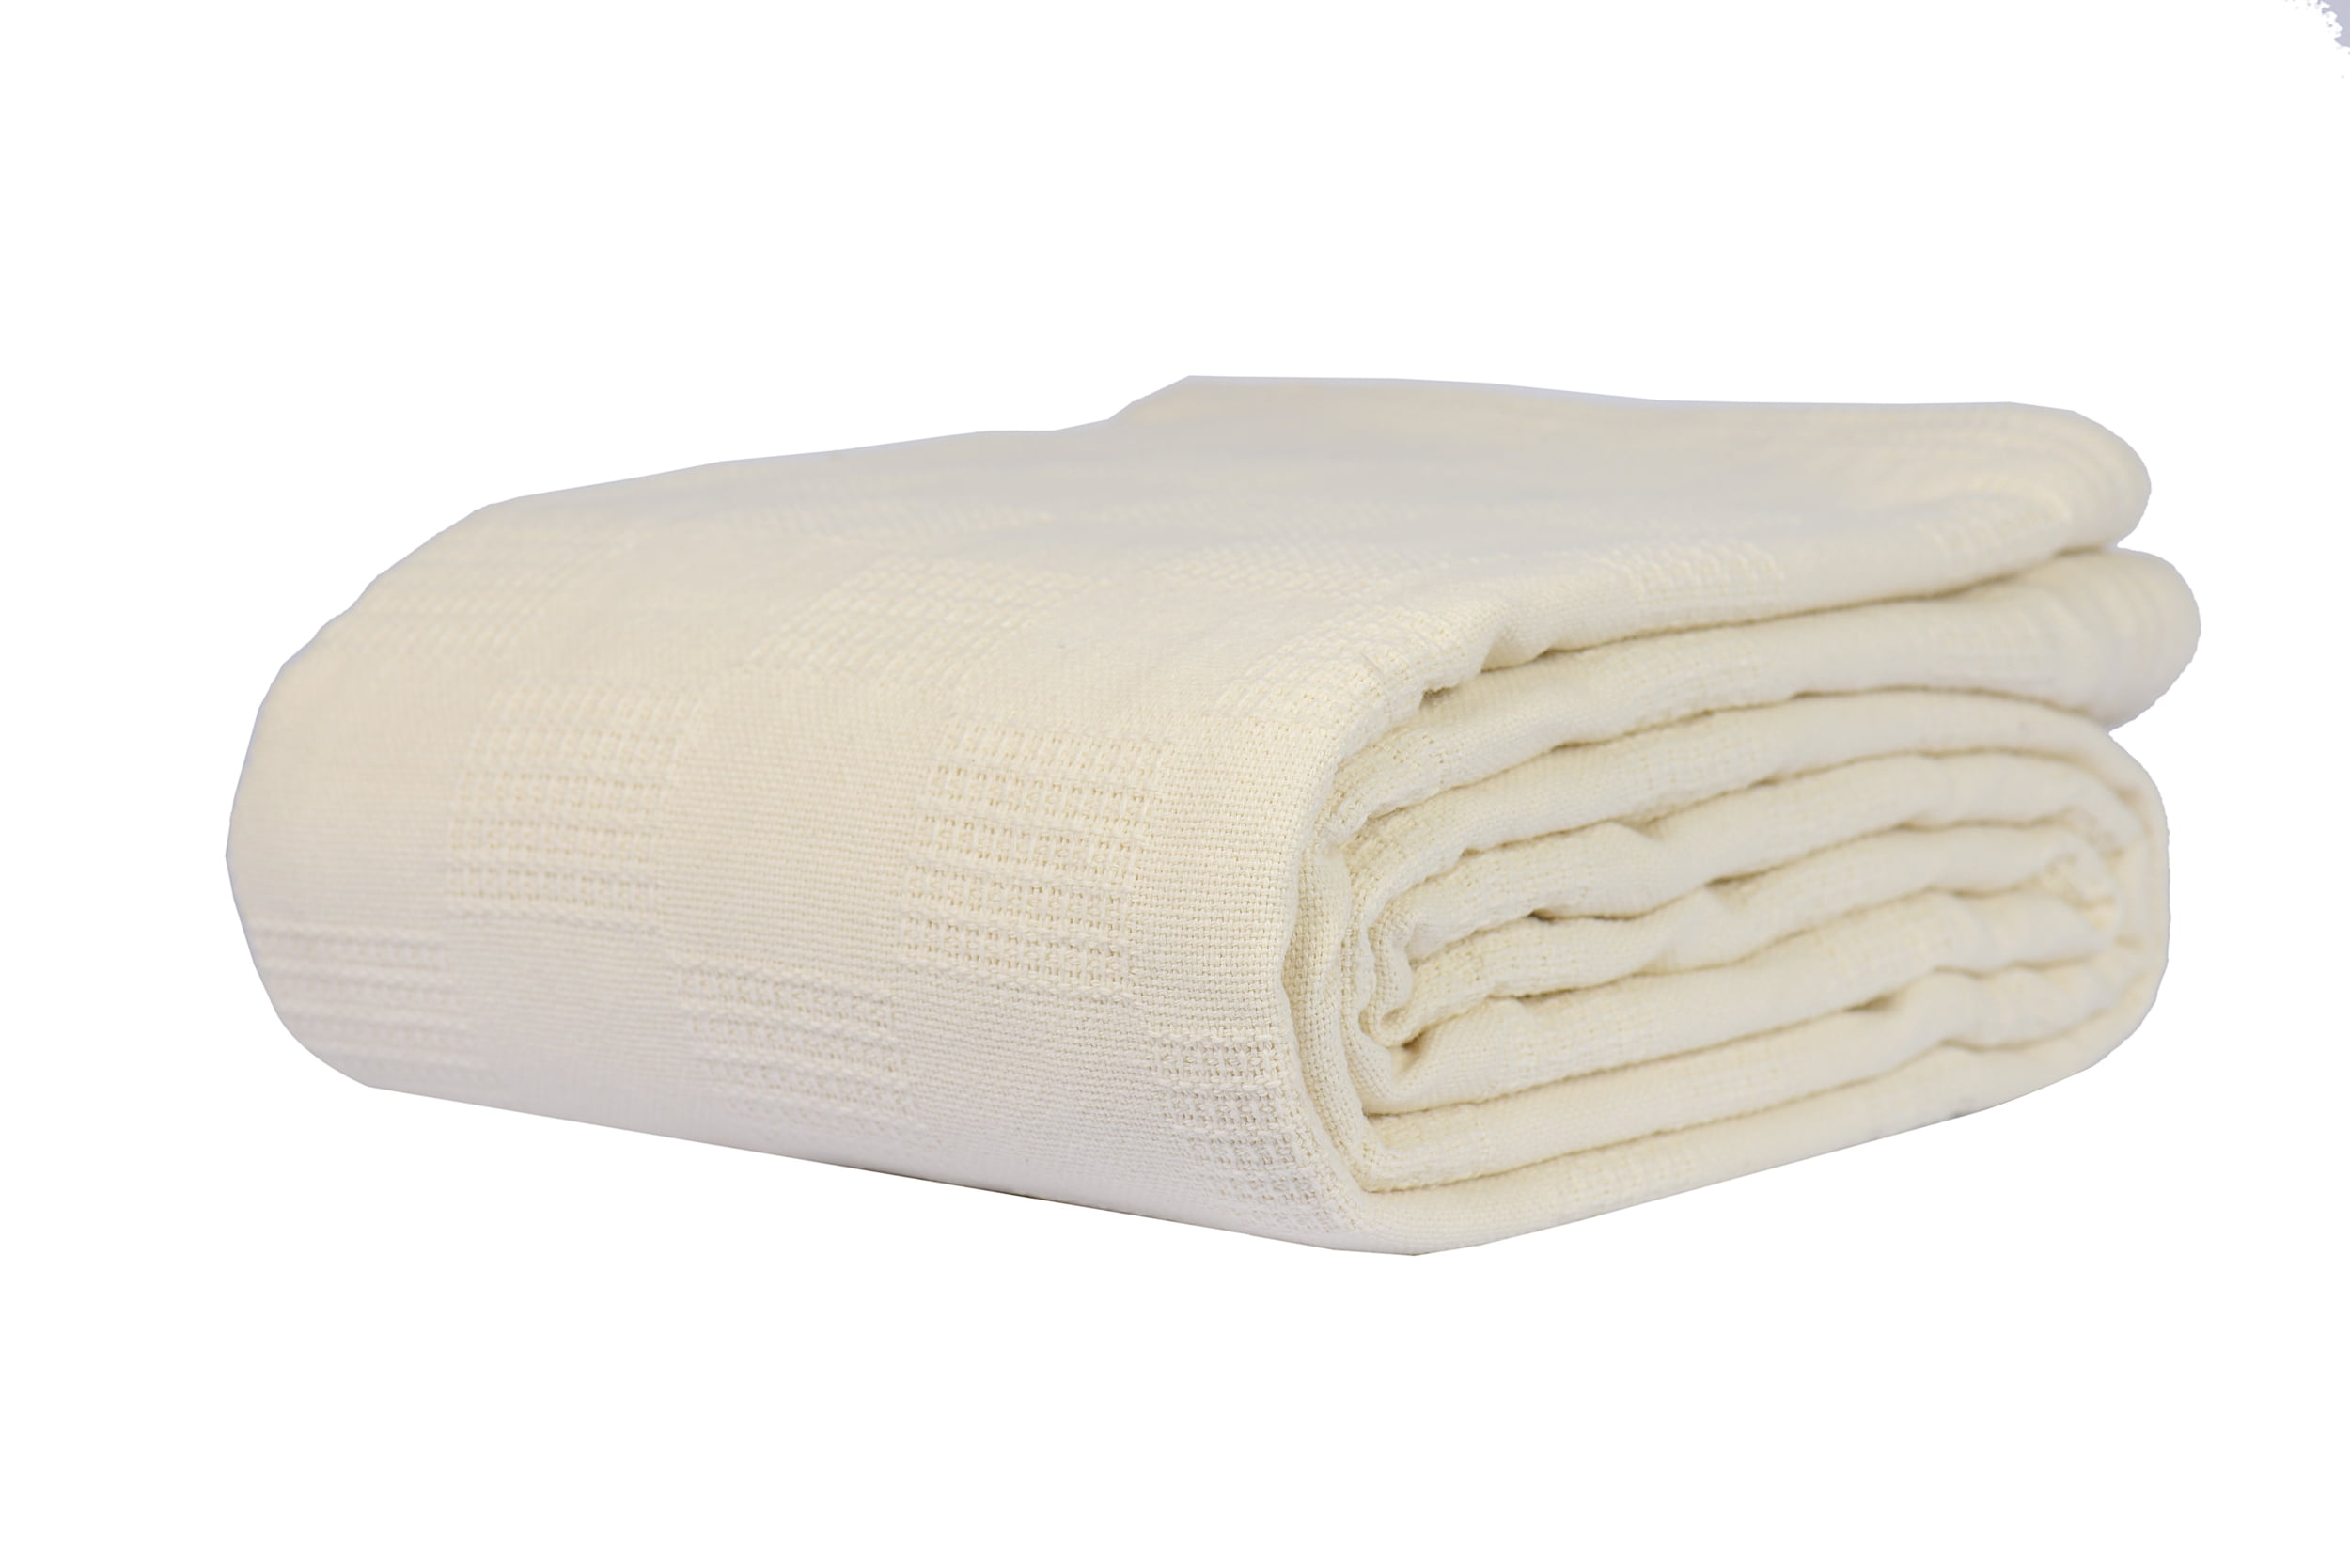 (74x100 Linteum White) Cotton 100% Spread Textile in, Thermal Blanket, SNAGLESS Hospital